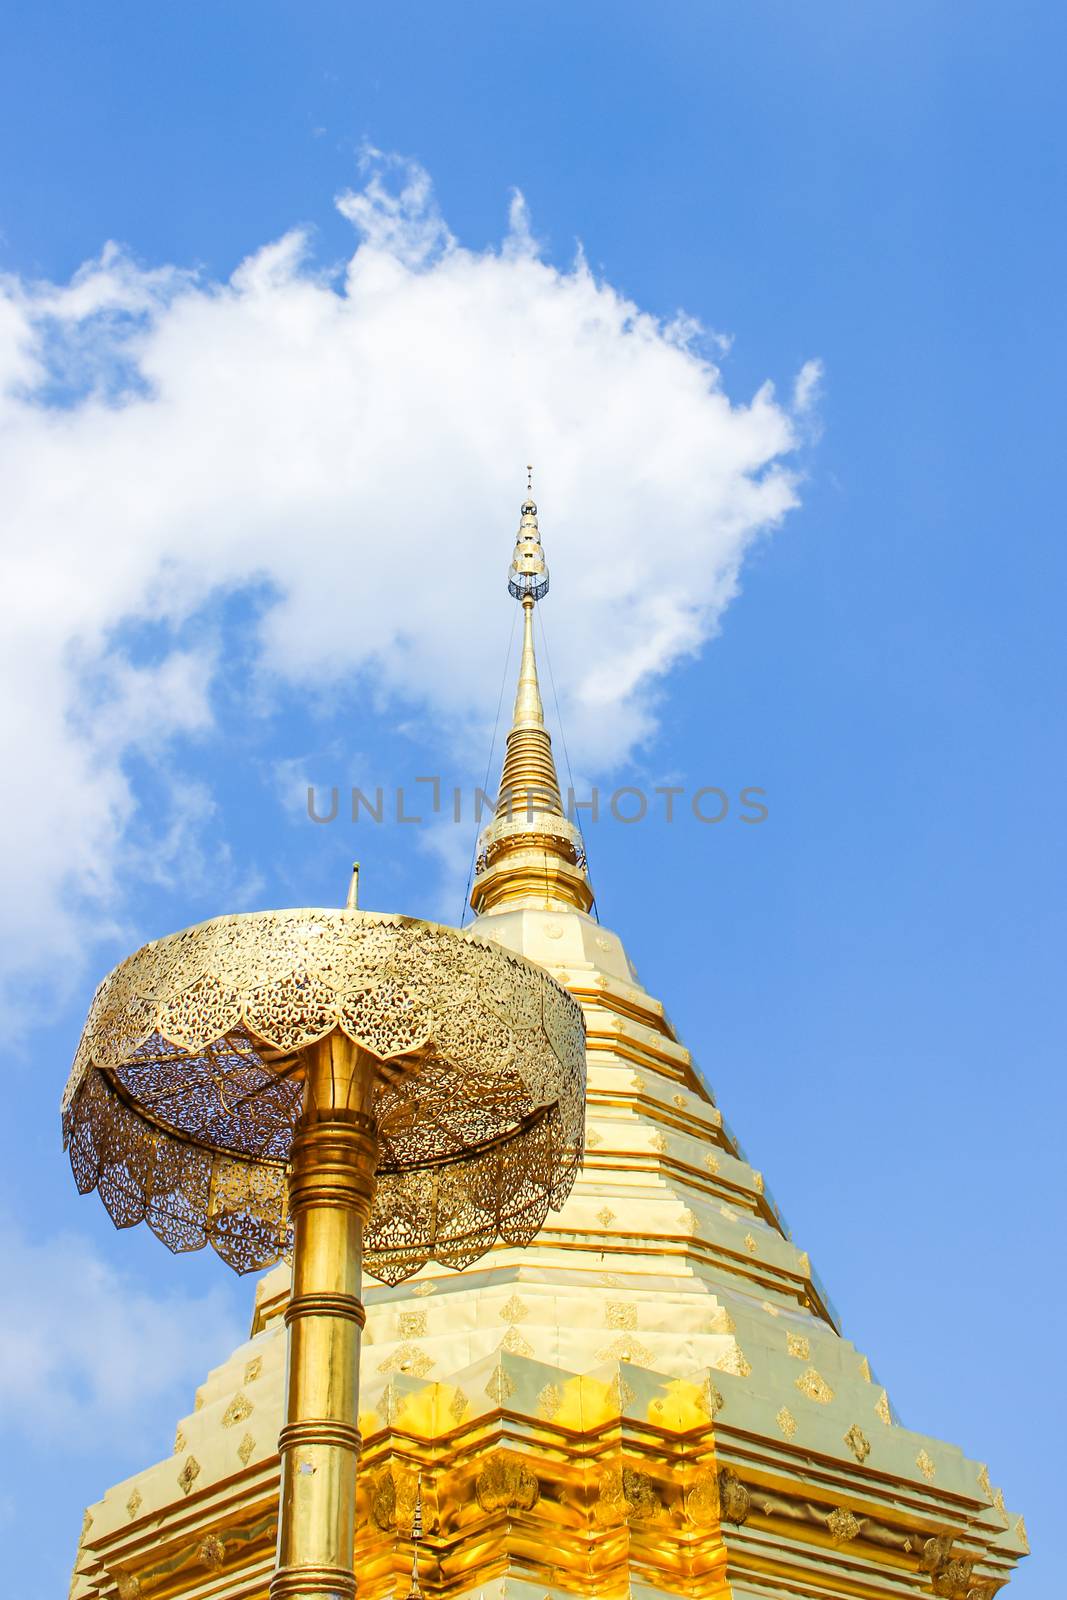 Golden pagoda and umbrella in Wat Phra That Doi Suthep is the popular tourist destination of Chiang Mai, Thailand.